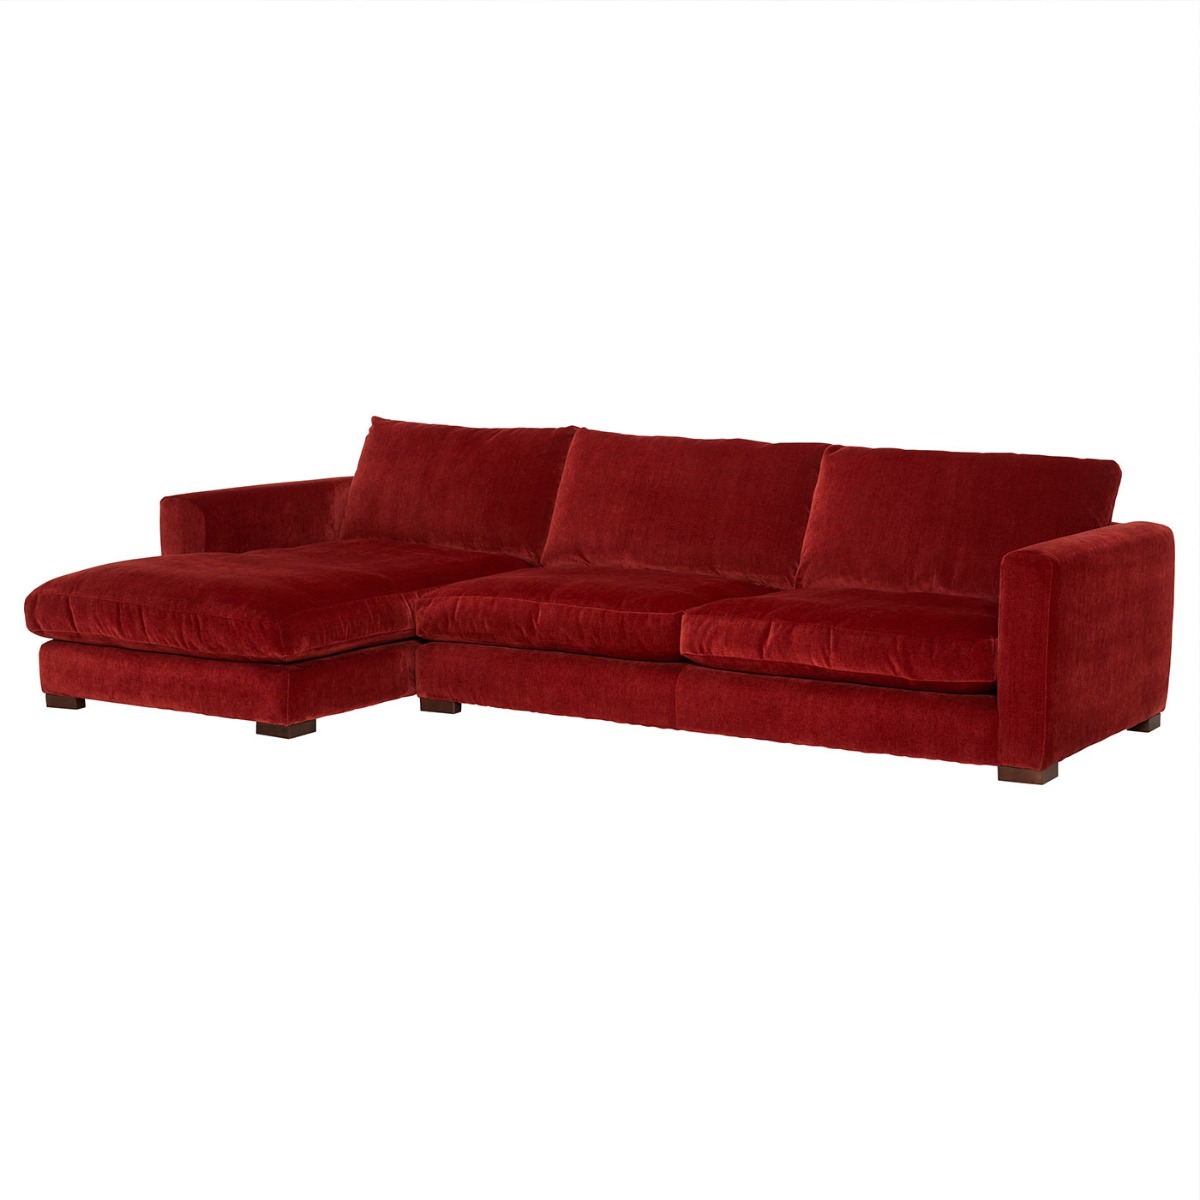 Fontella Large Chaise Left, Red Fabric | Barker & Stonehouse